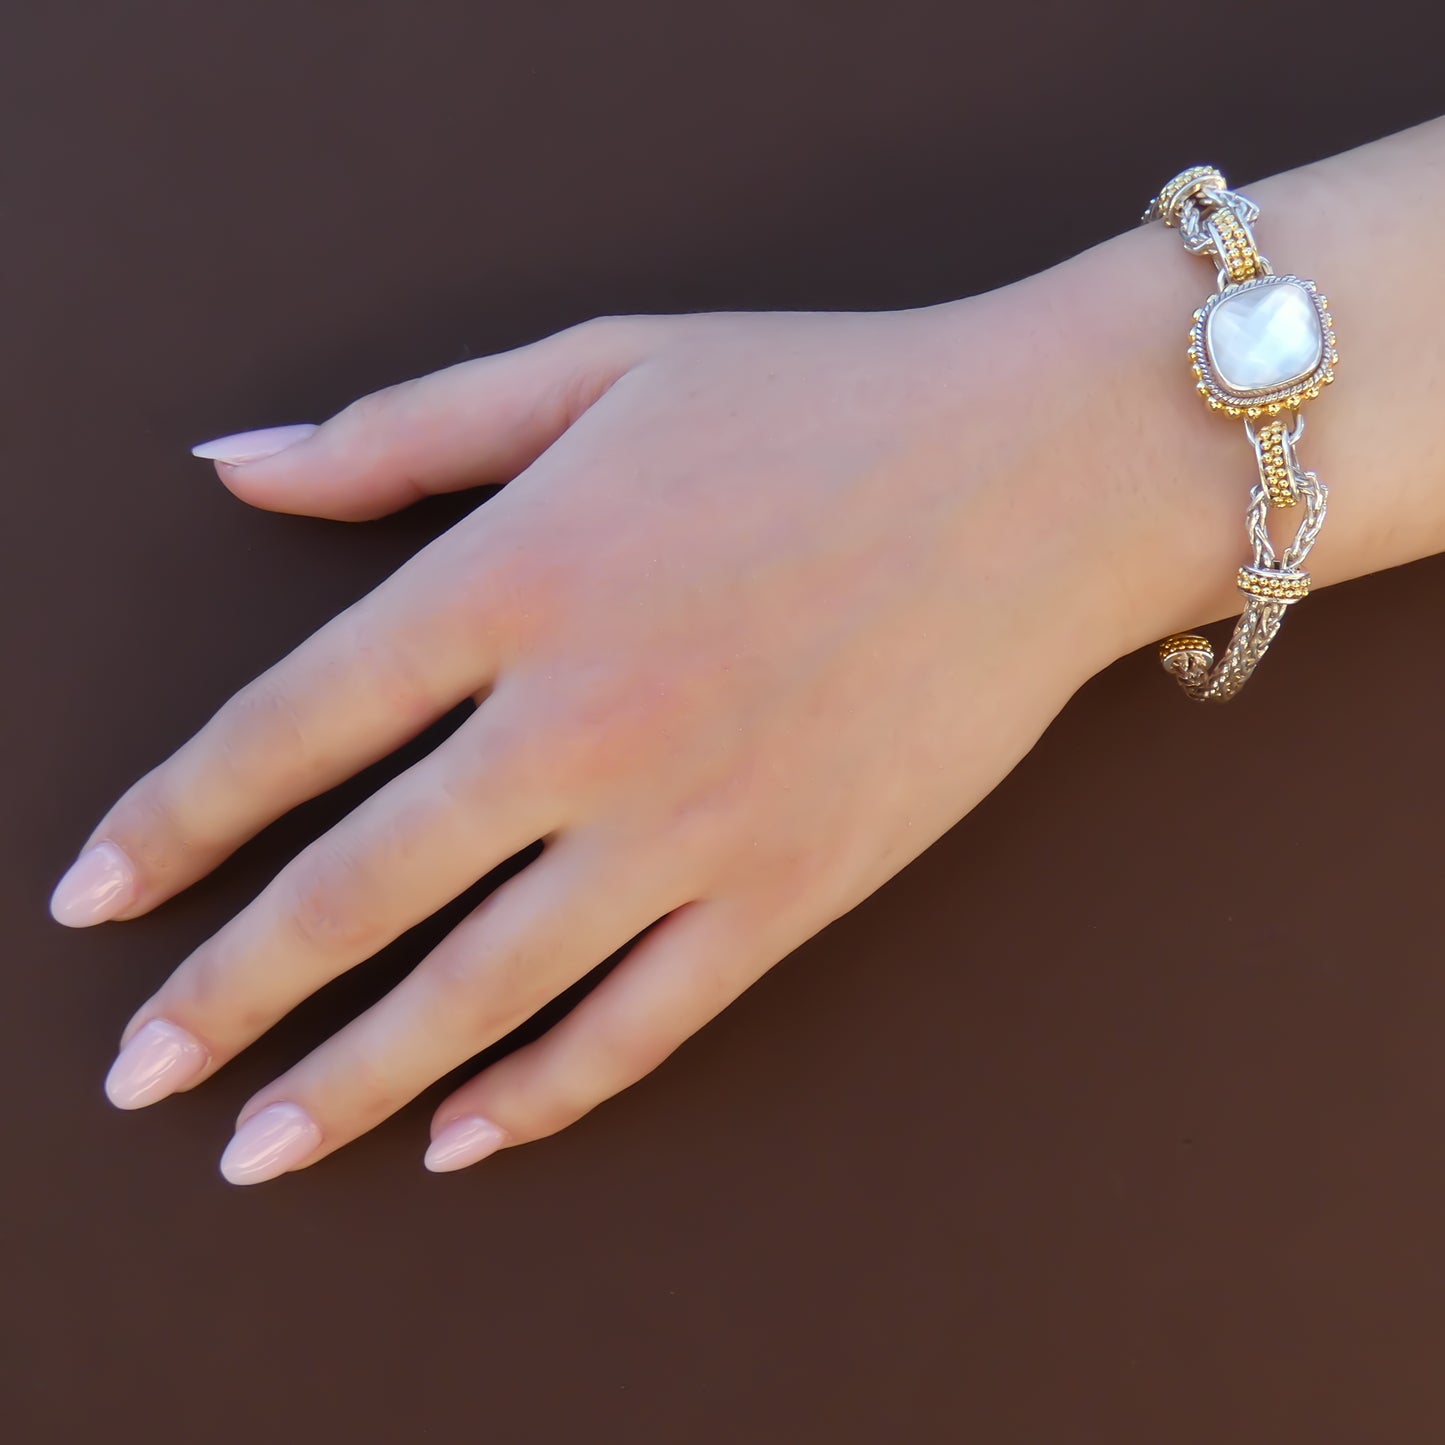 Woman wearing a silver and gold bracelet with a single central station that has a mother of pearl doublet.